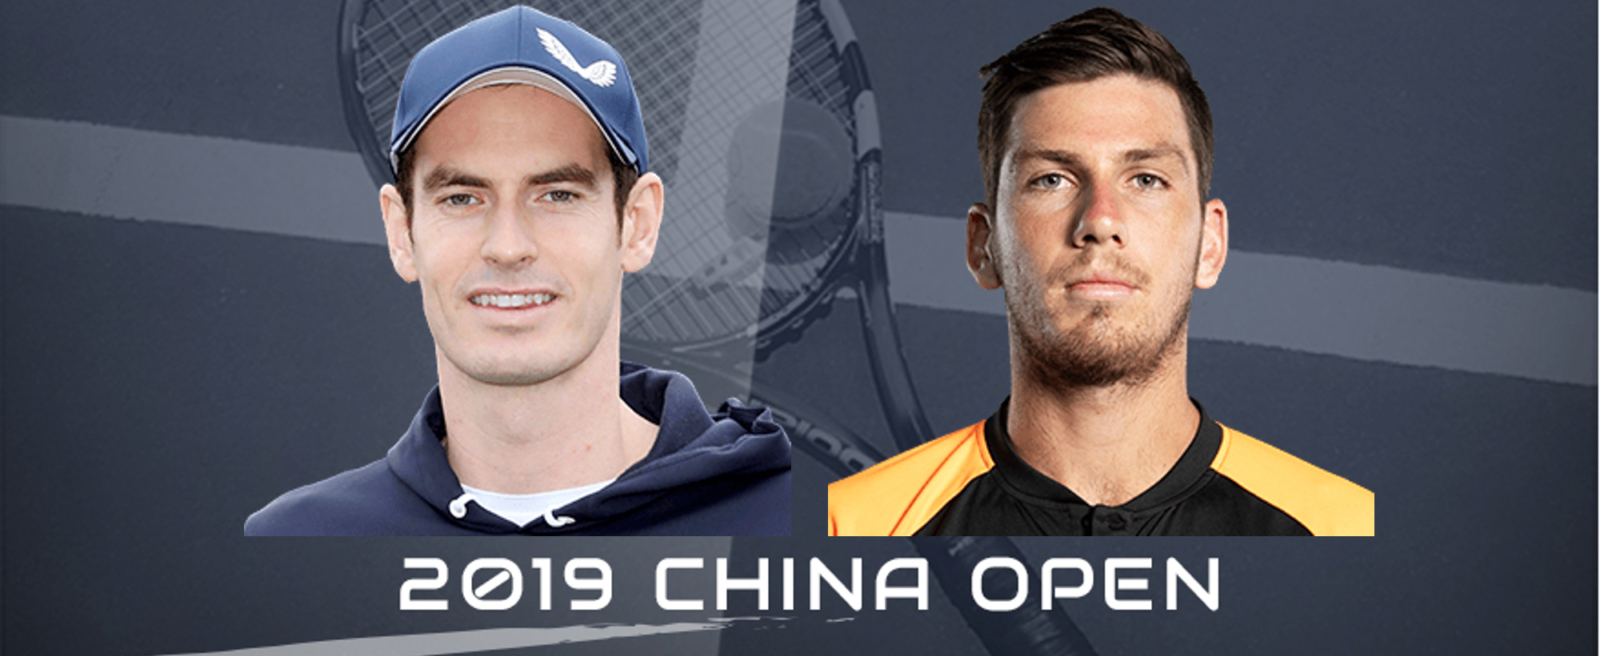 Cameron Norrie vs Andy Murray China Open 02.10.2019 - Tennis Picks